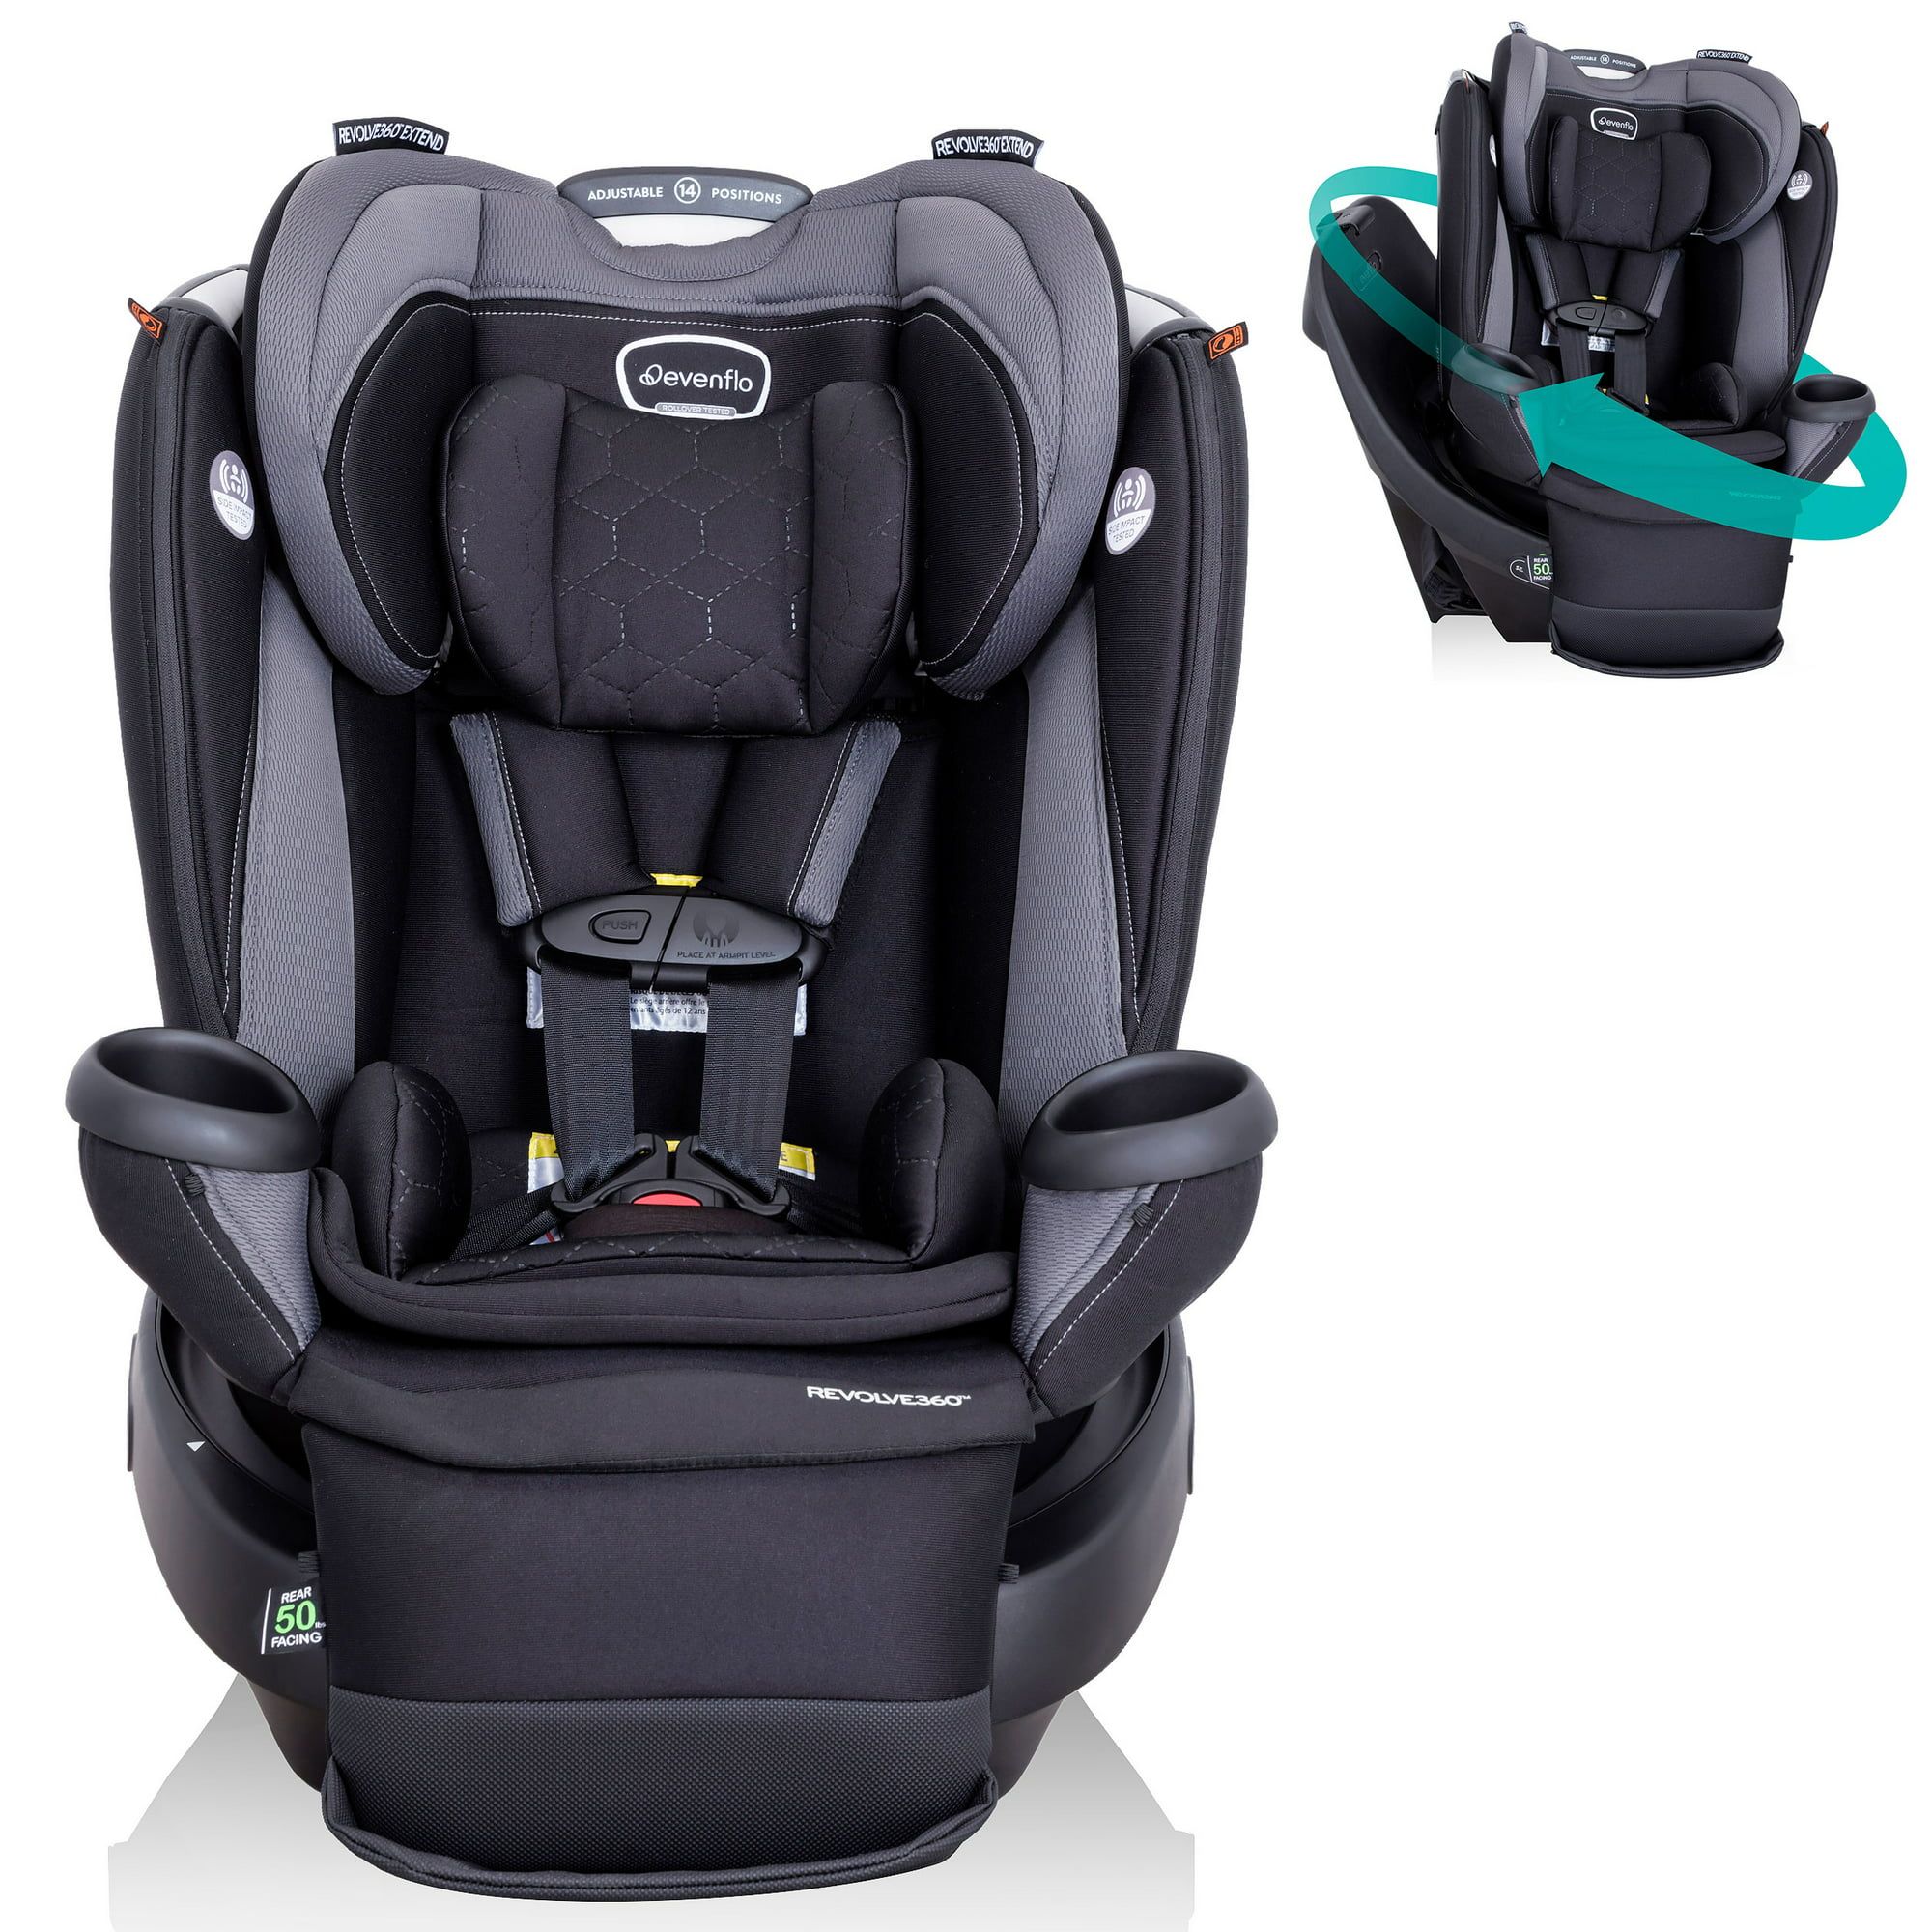 Revolve360 Extend All-in-One Rotational Car Seat with Quick Clean Cover (Revere Gray) | Walmart (US)